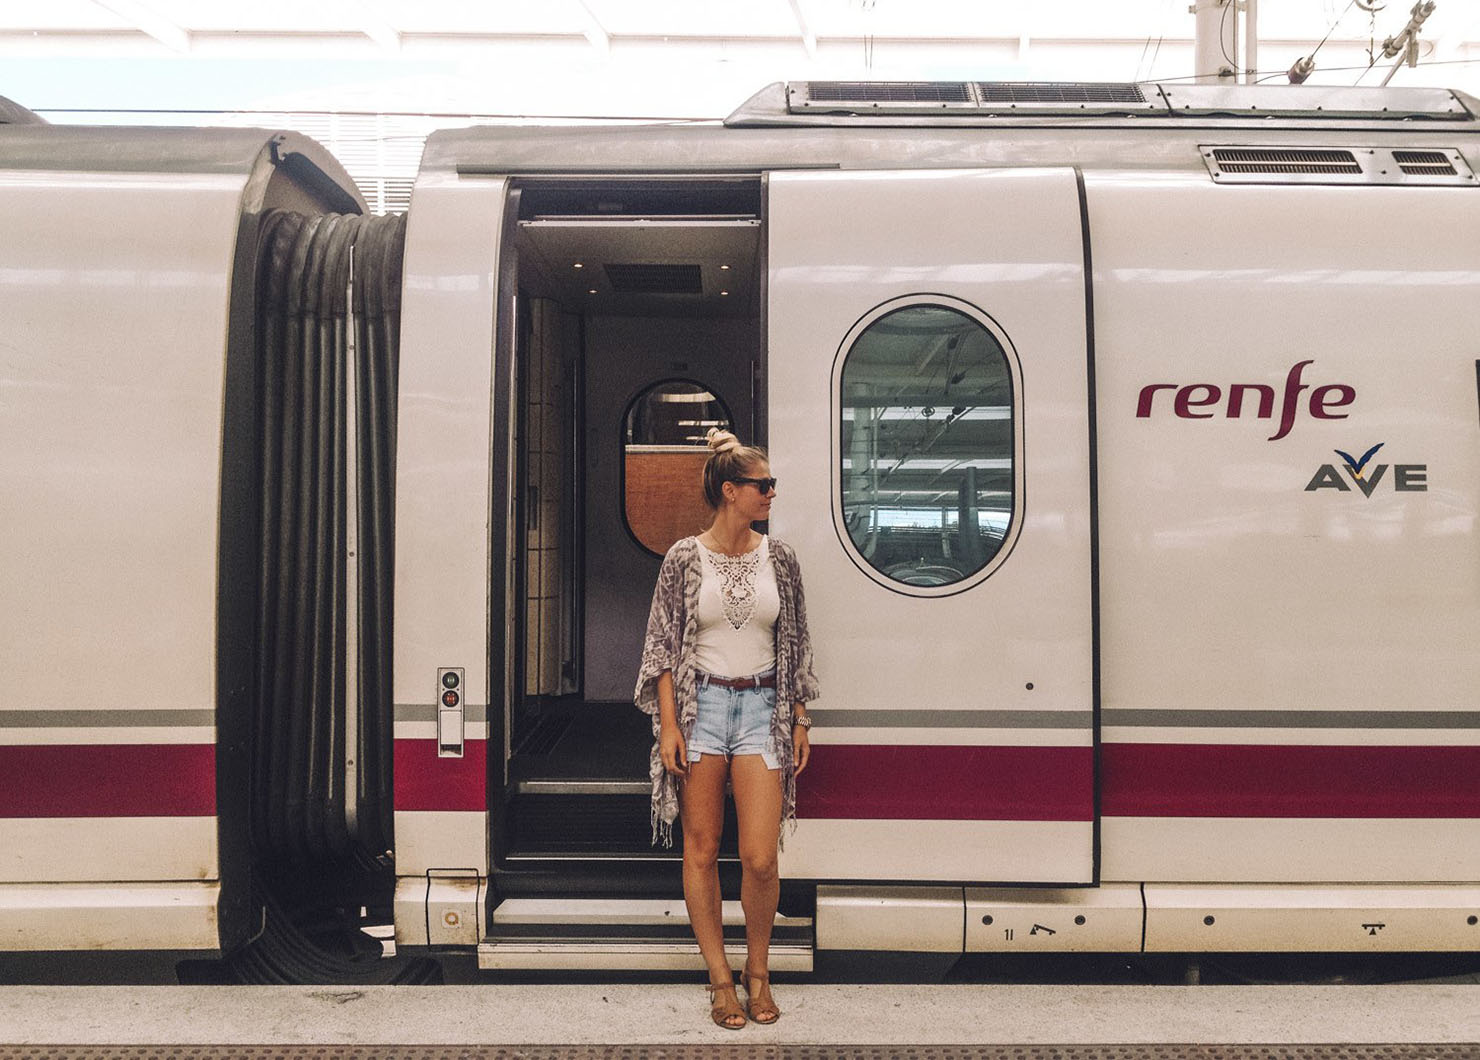 The Beginner's Guide to Train Travel in Europe • The Blonde Abroad